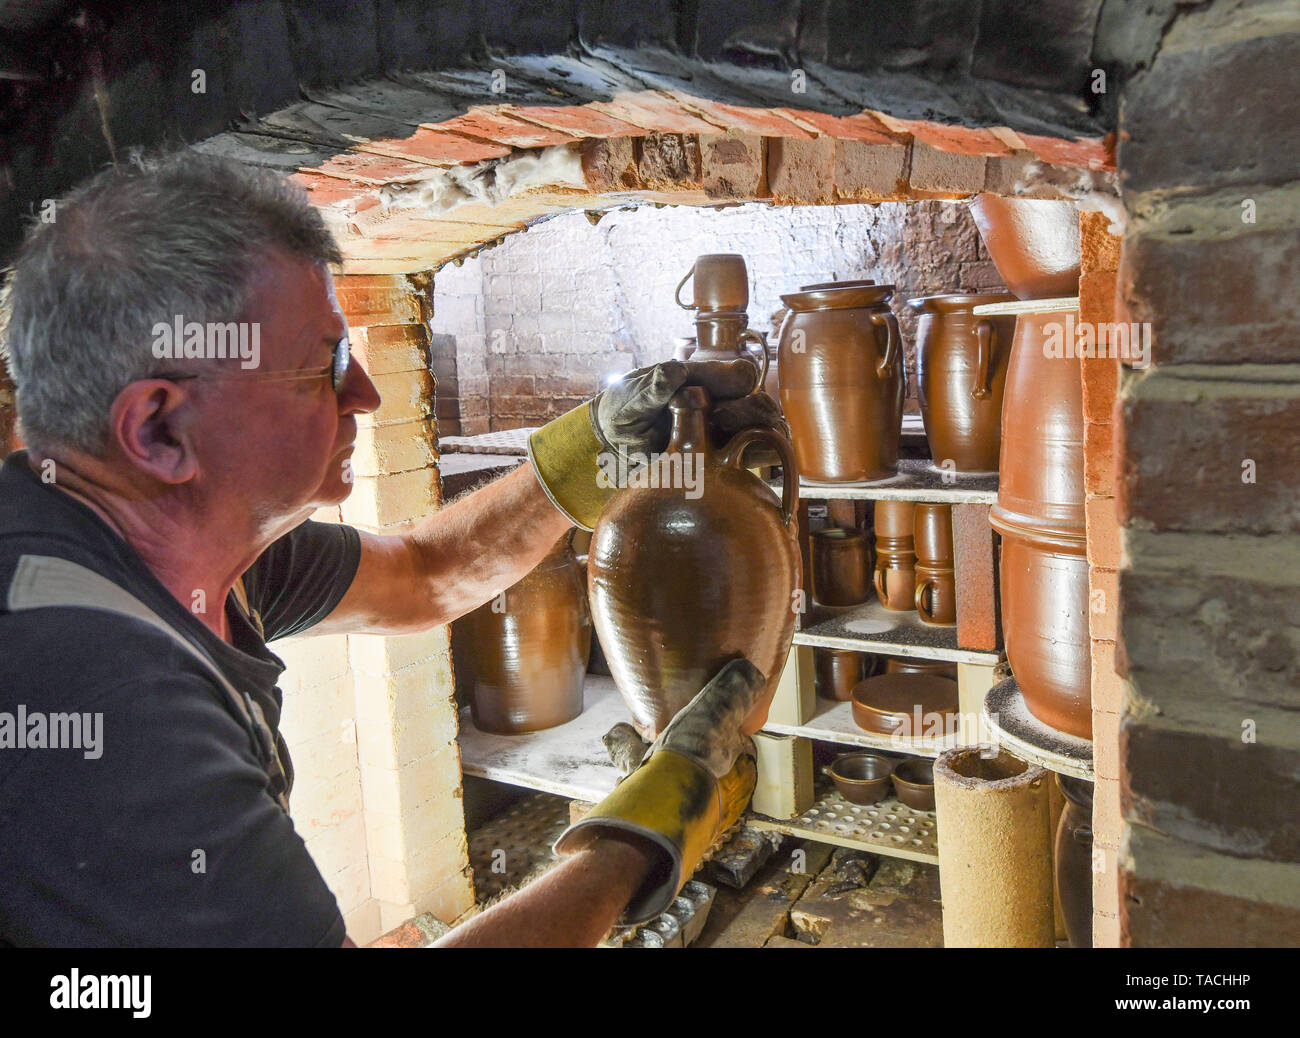 24 May 2019, Brandenburg, Groß Neuendorf: Manfred Dannegger, potter, crouches in front of his still hot oven and removes burnt jugs, cups and other vessels from the combustion chamber. Since 1997 the potter has been producing this clay glazed stoneware in the tradition of Bunzlau brownware. The dishes are fired in the oven at about 1300 degrees Celsius for about 20 hours. The oven must then cool for four days. This weekend (25.05./26.05.) the 12th pottery market will take place in Groß Neuendorf. Then 22 potters from near and far present themselves directly at the dike of the German-Polish bor Stock Photo